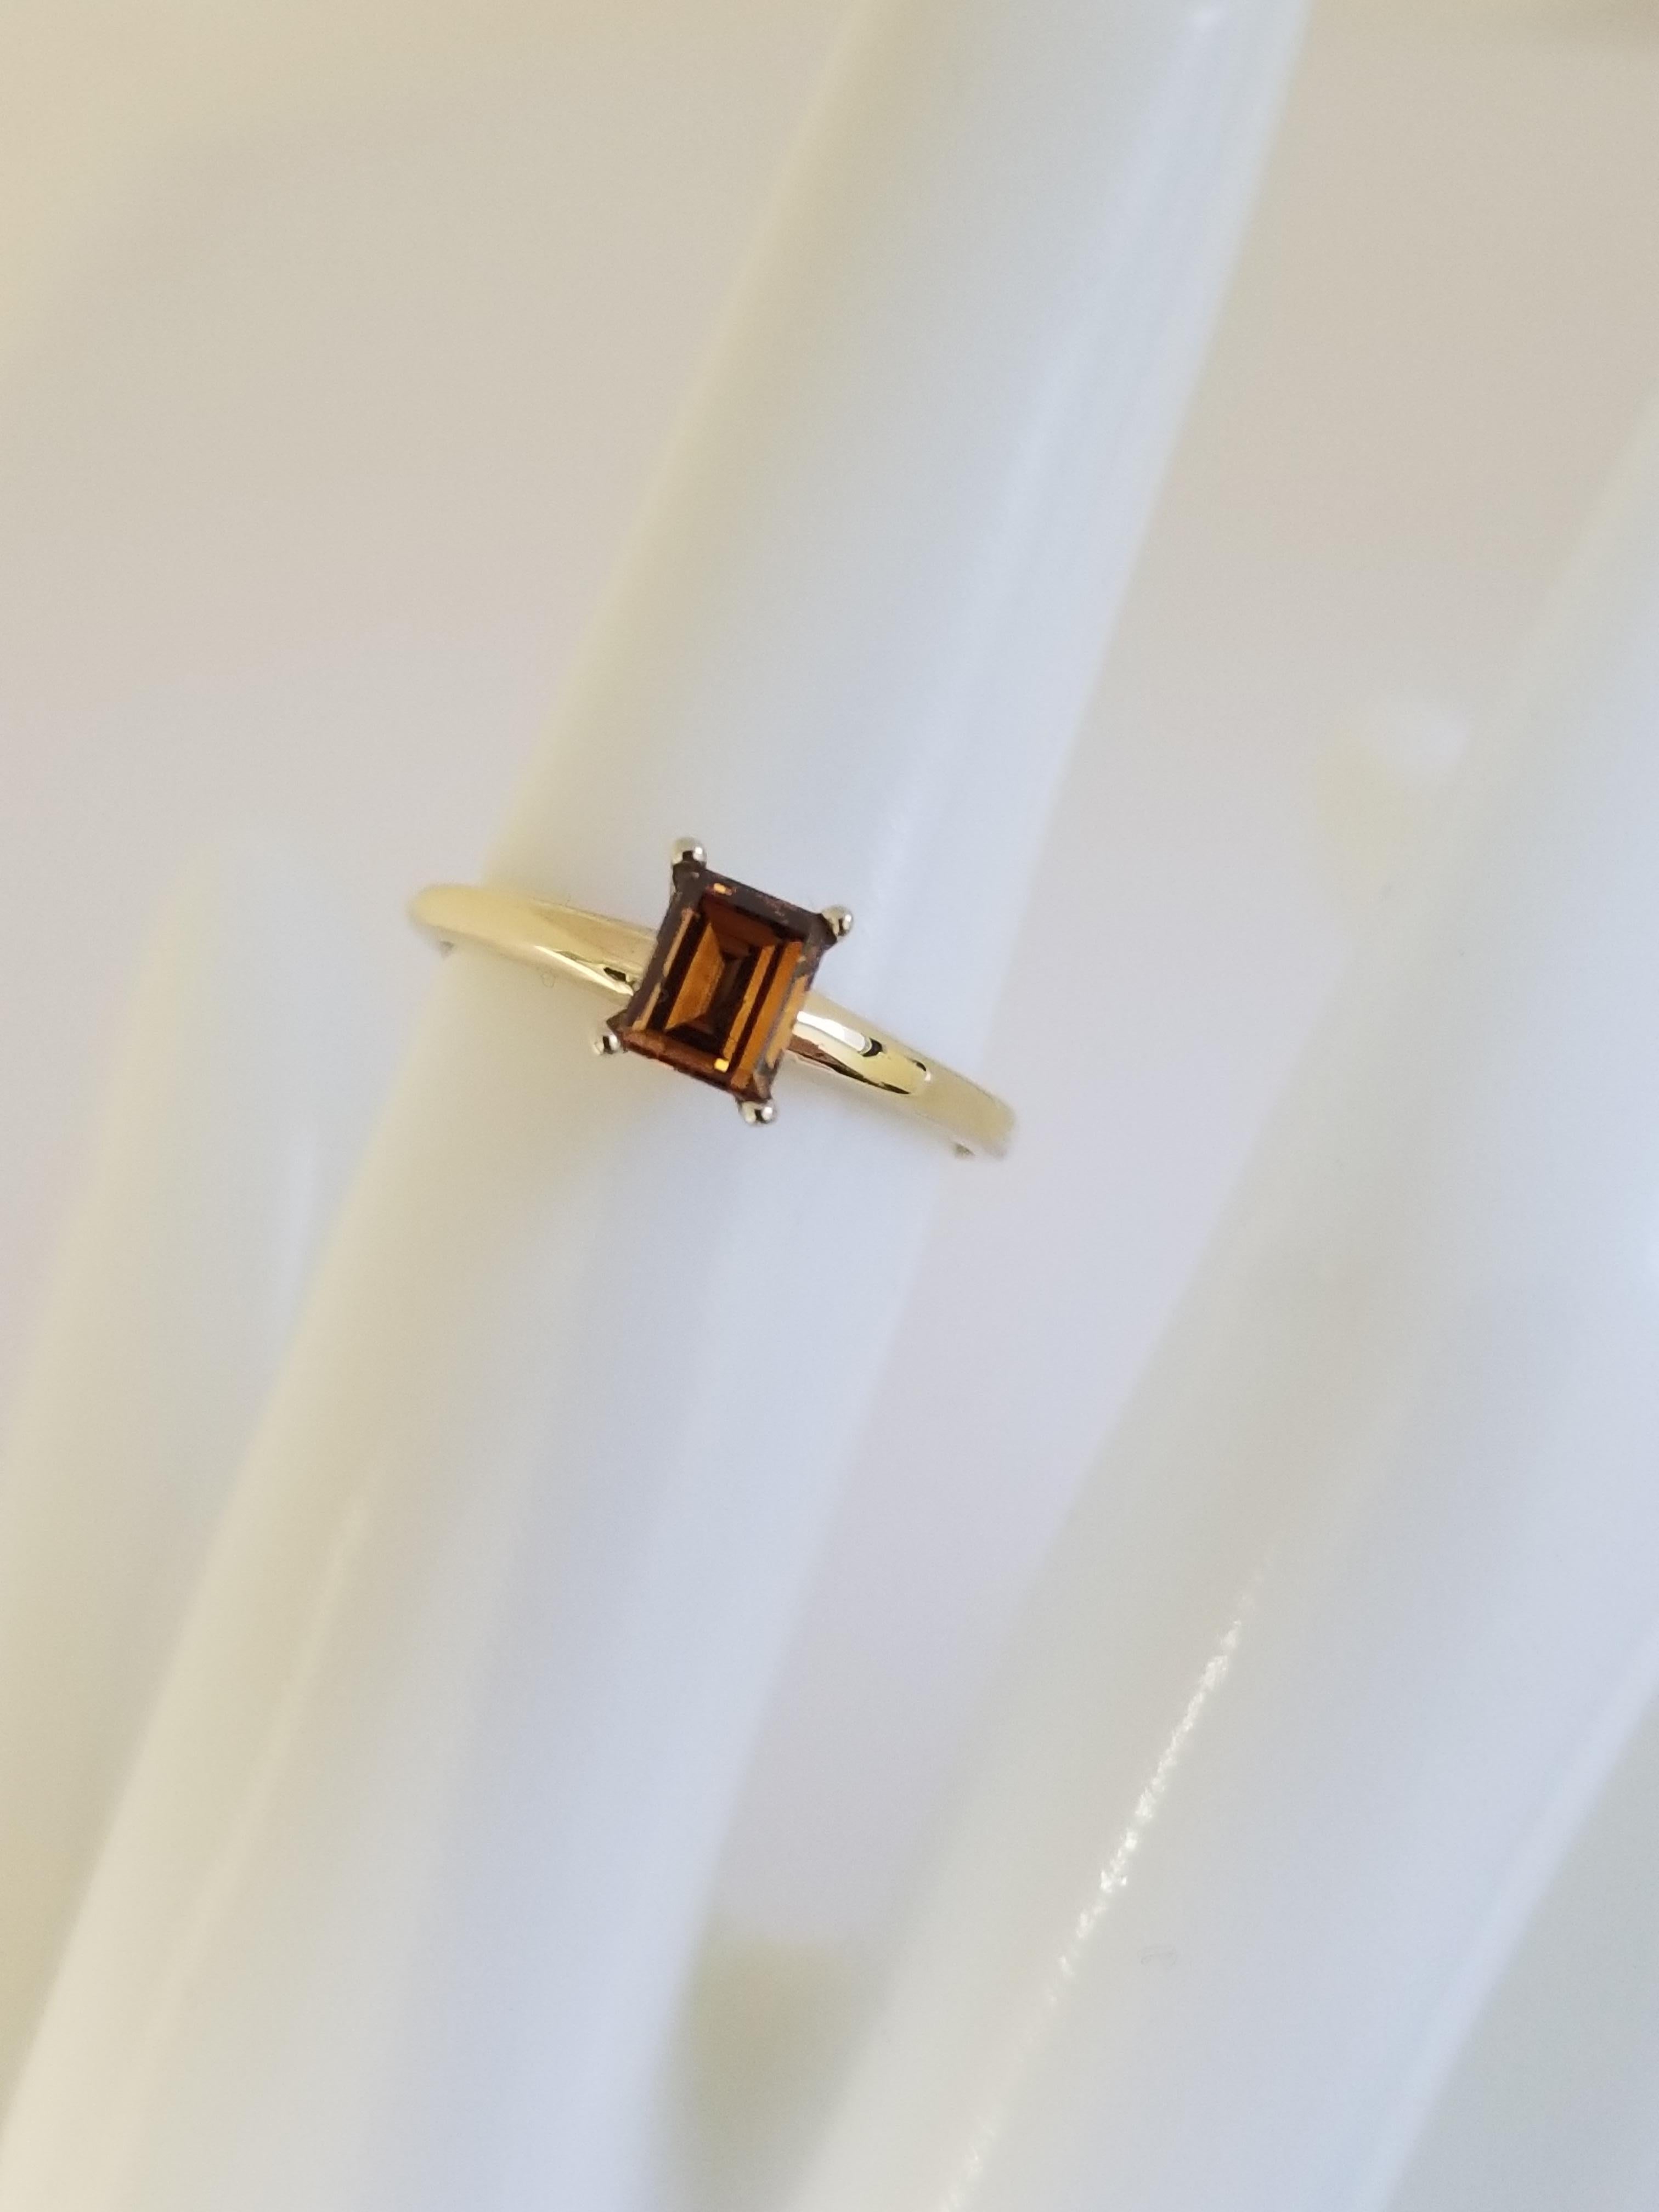 All Natural Fancy Deep Orangy Brown Color Emerald Cut Diamond Set on 2 tone 4 Prong Solitaire Ring Weighing 0.44 carats by IGI. Elegance for every occasion.

Ring Size: 5.75
Color Fancy Deep Orangy Brown 
Clarity I
Yellow Gold Ring 14k with 4 prong